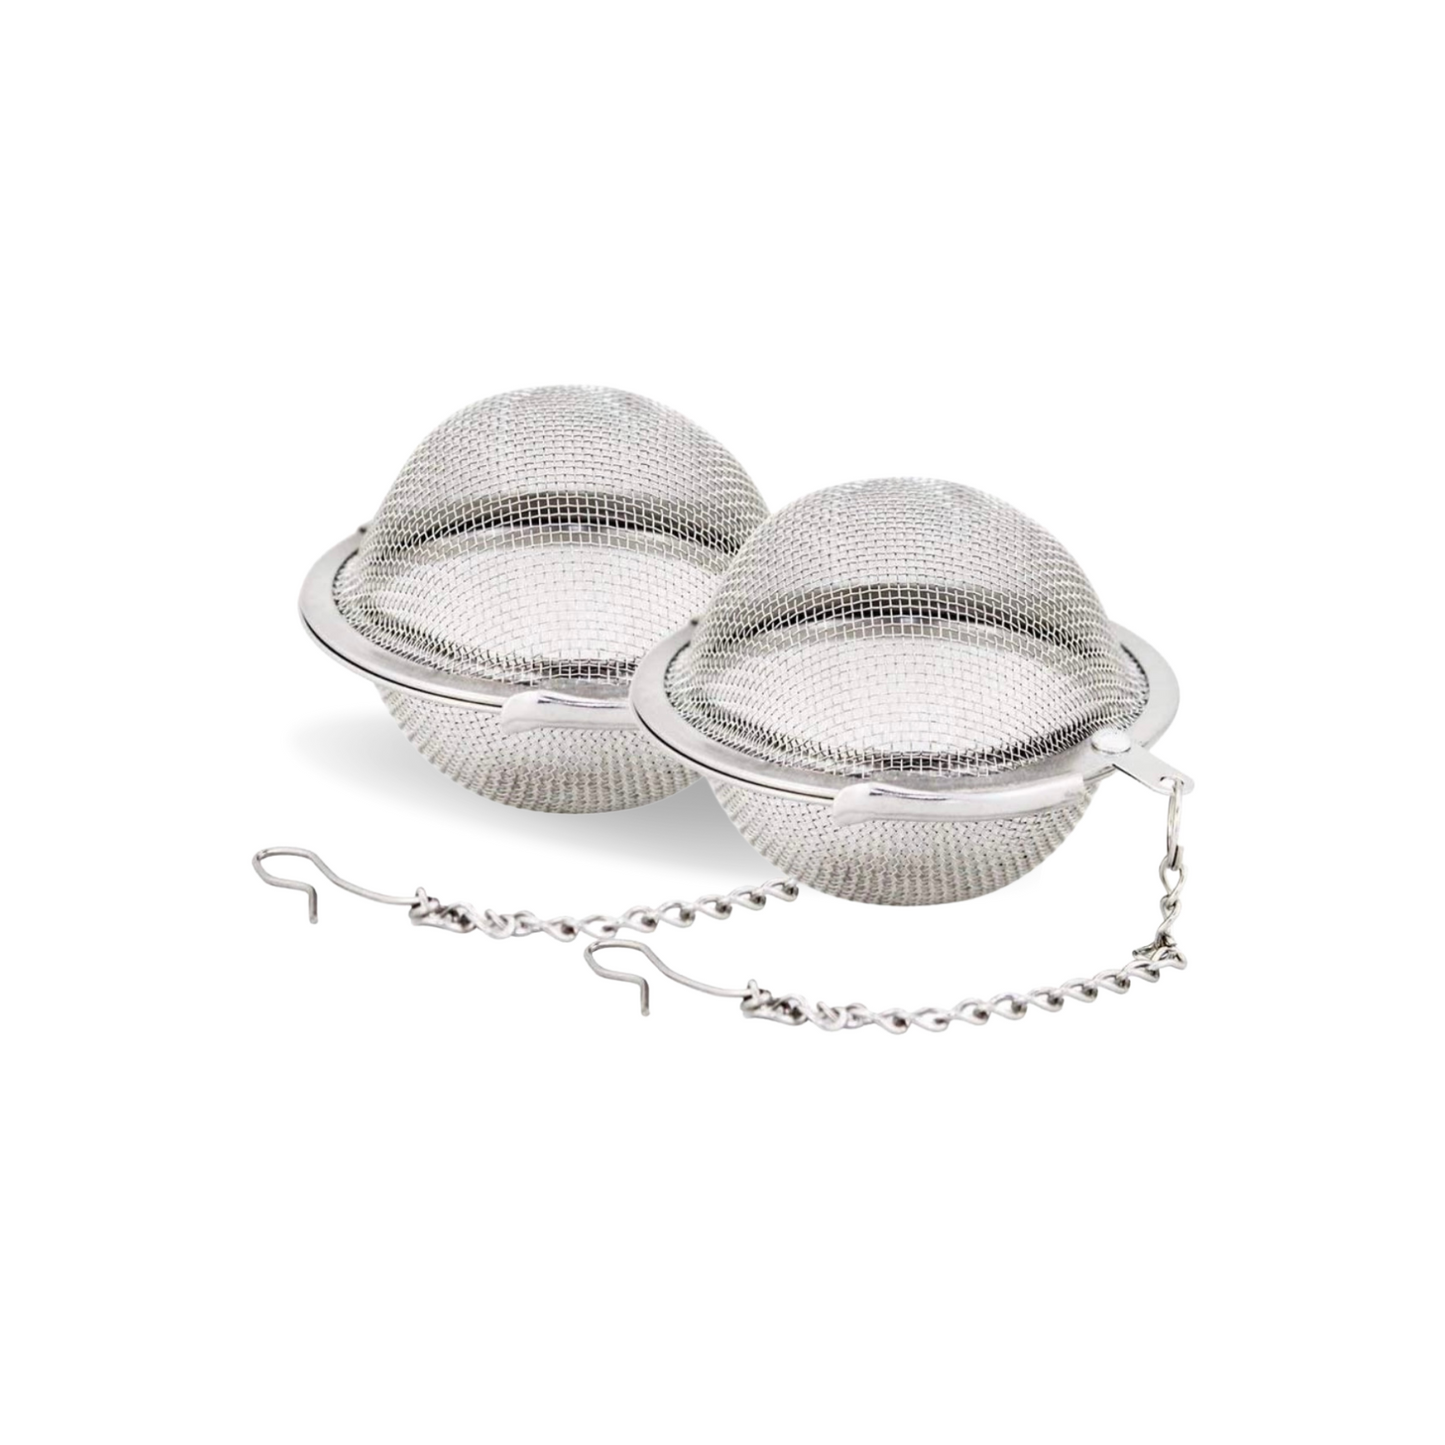 round mesh tea ball steeper for loose tea leaves now on sale at holisticherbbae.com